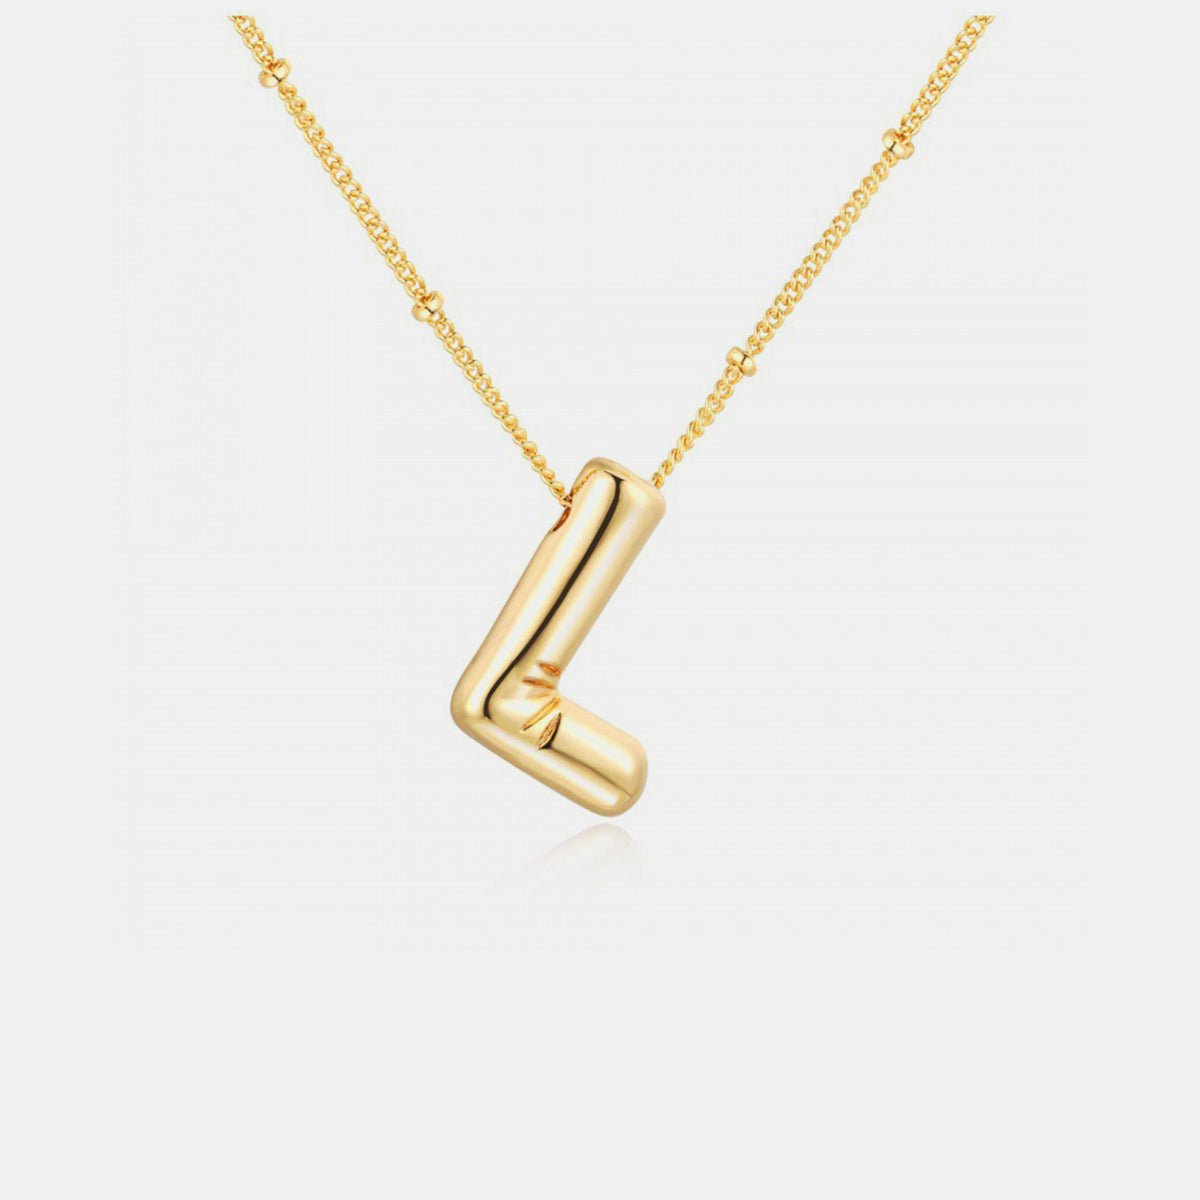 Bravada Gold-Plated Letter Pendant Necklace K-S Jewelry Featured Fashion Bravada